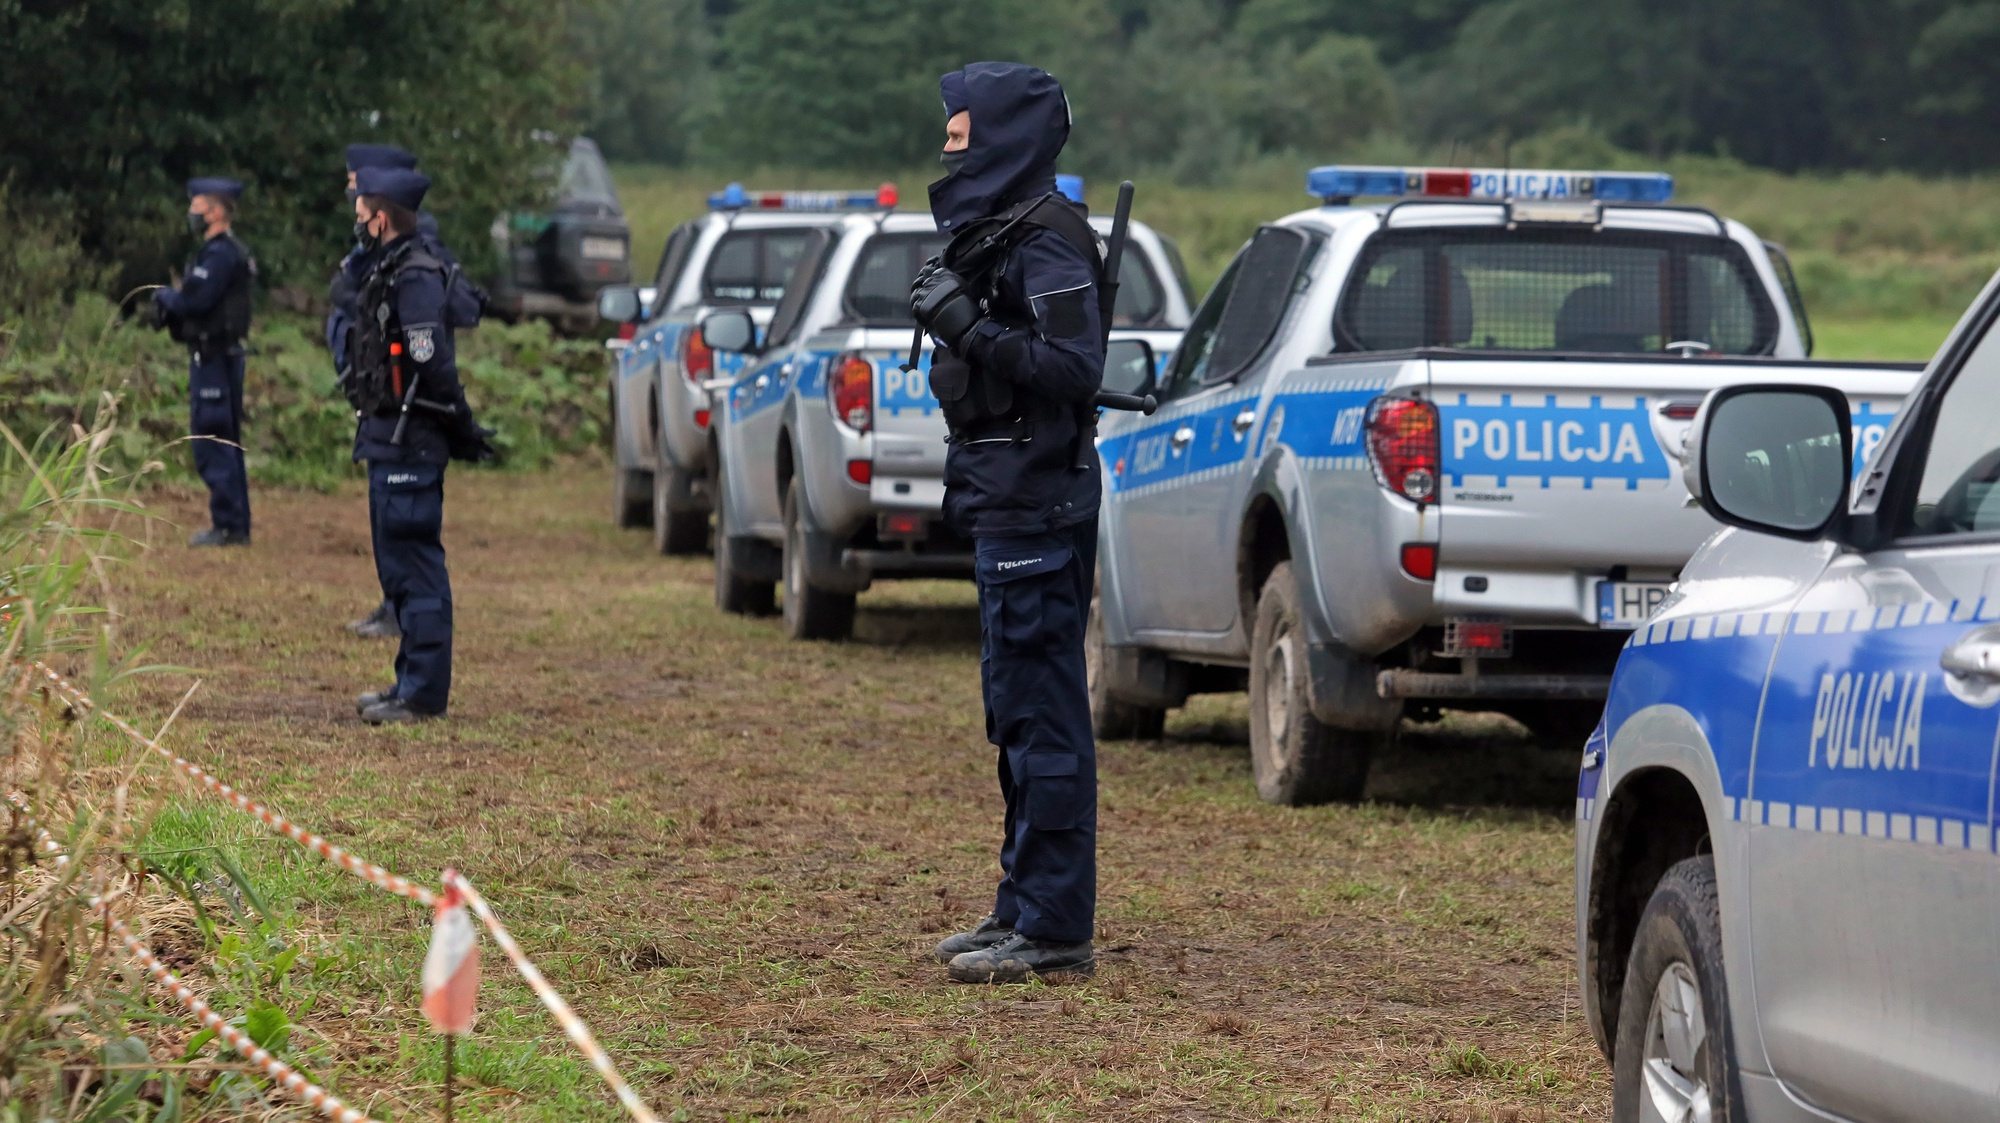 epa09436765 Polish police officers stand at the Polish-Belarusian border near Usnarz Gorny village, north-west Poland, 30 August 2021. The number of migrants from Iraq, Syria, Afghanistan and other countries trying to cross the Belarusian border into neighbouring EU states has increased sharply in recent months. According to official sources, a group of 24 people, including 20 men and four women but no children, camped at Usnarz Gorny on the Belarusian side of the Polish-Belarusian border.  EPA/ARTUR RESZKO POLAND OUT